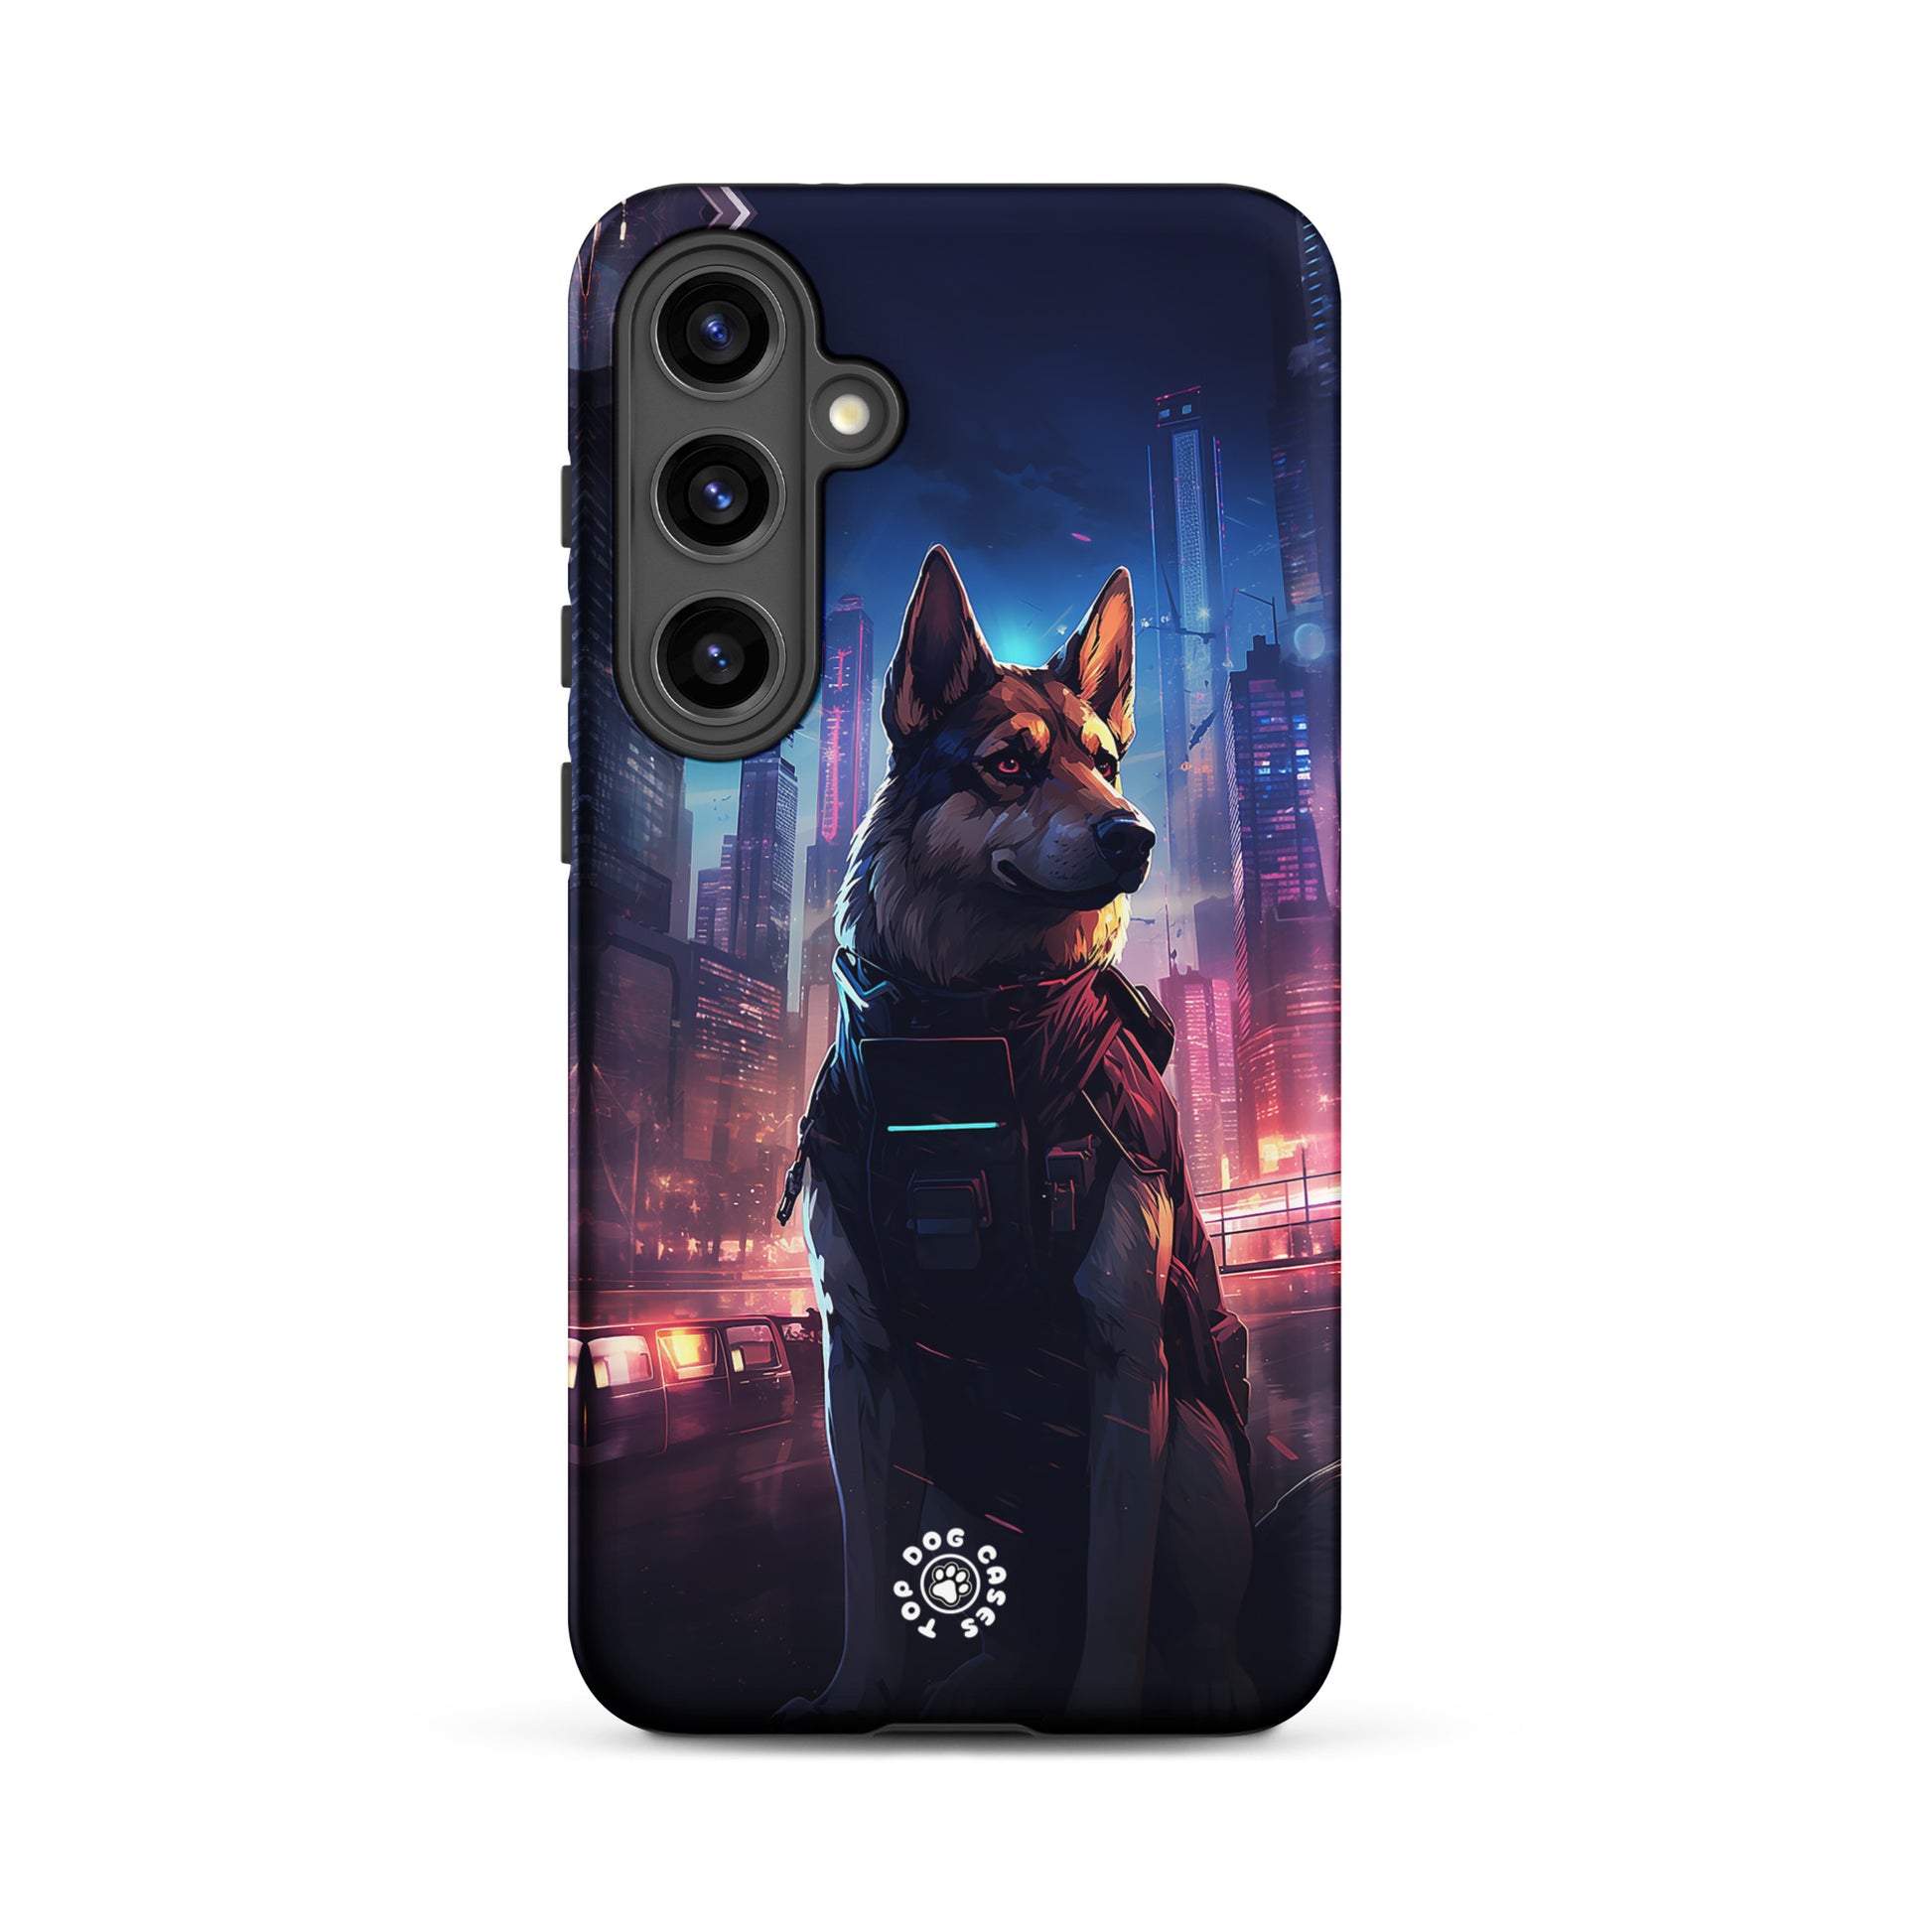 German Shepherd in the City - Samsung Phone Case - Cute Phone Cases - Top Dog Cases - #CityDogs, #CuteDogs, #GermanShepherd, #SamsungGalaxyCase, #SamsungGalaxyS20, #SamsungGalaxyS21, #SamsungGalaxyS22, #SamsungGalaxyS22Ultra, #SamsungGalaxyS23, #SamsungGalaxyS23Ultra